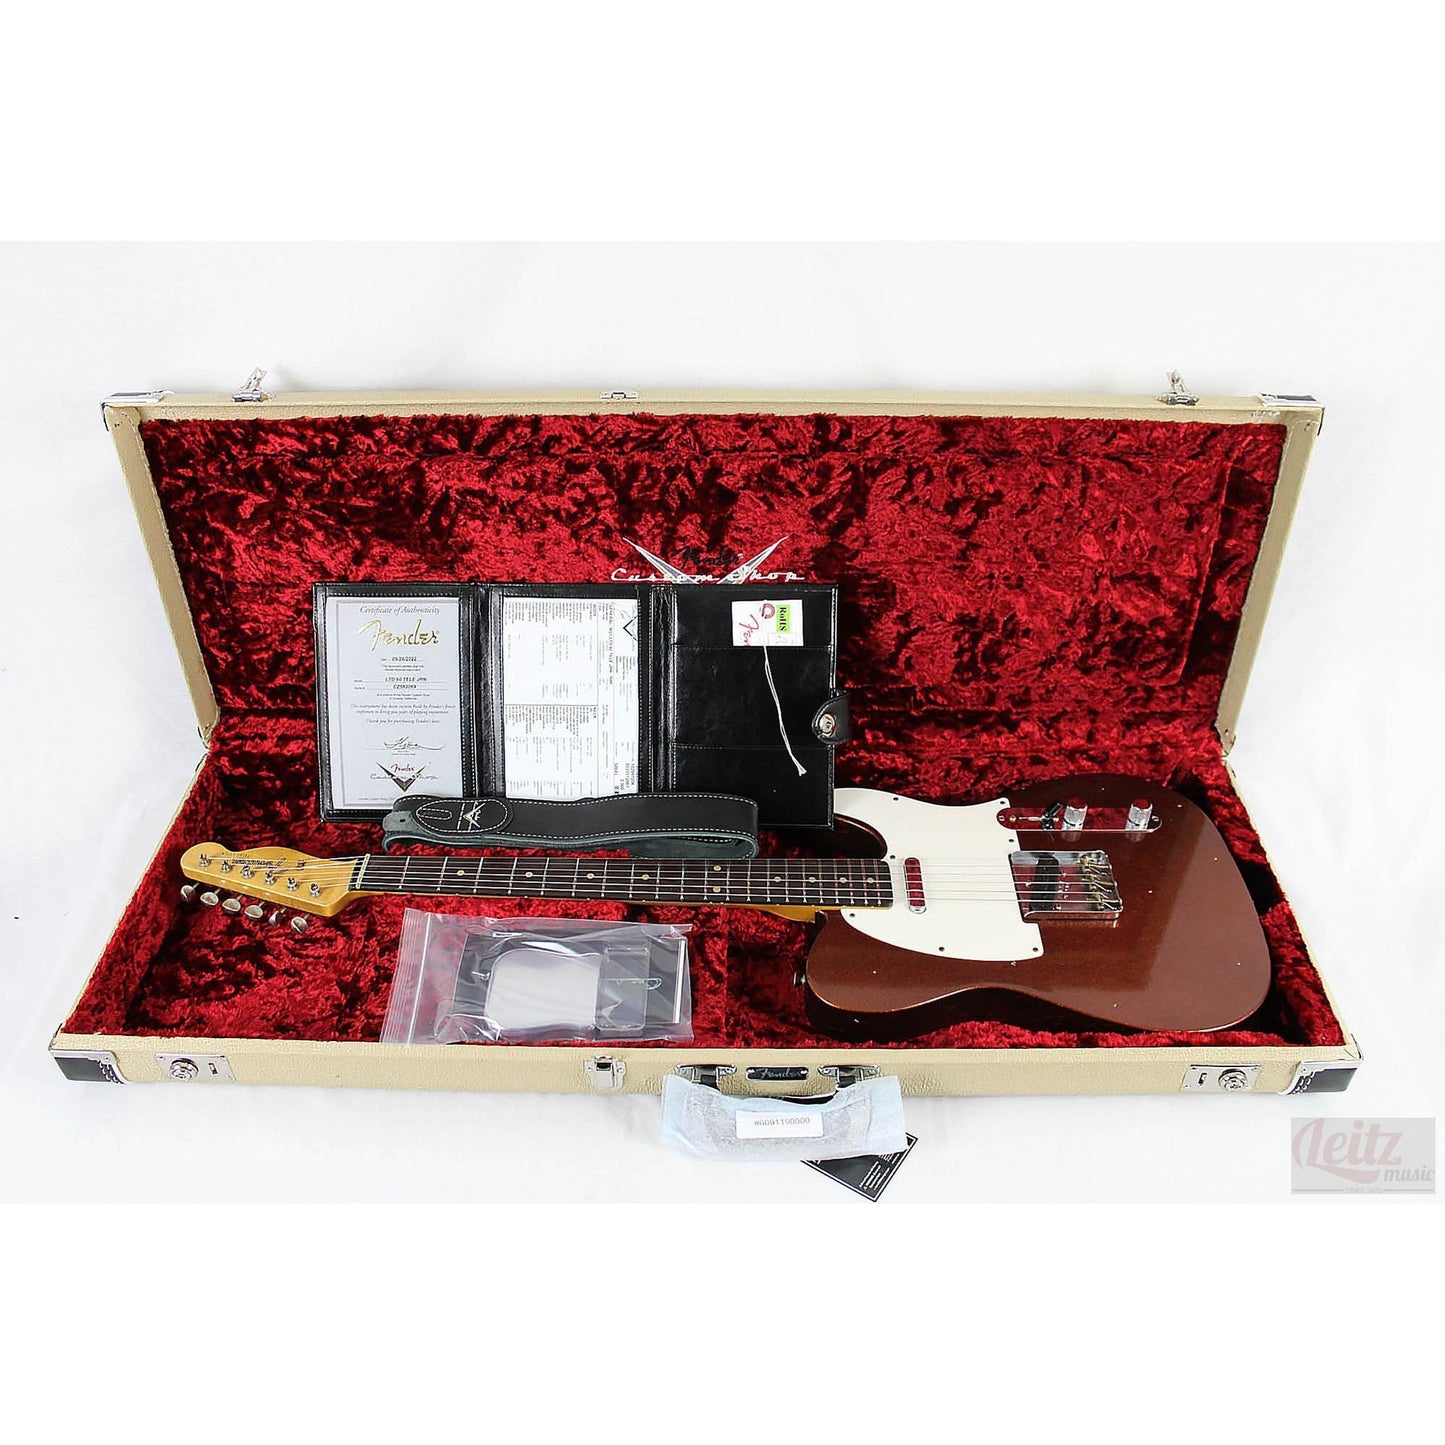 Fender Custom Shop Limited Edition 1960 Telecaster Journeyman Relic - Root Beer Flake - Leitz Music-885978878499-CZ562069